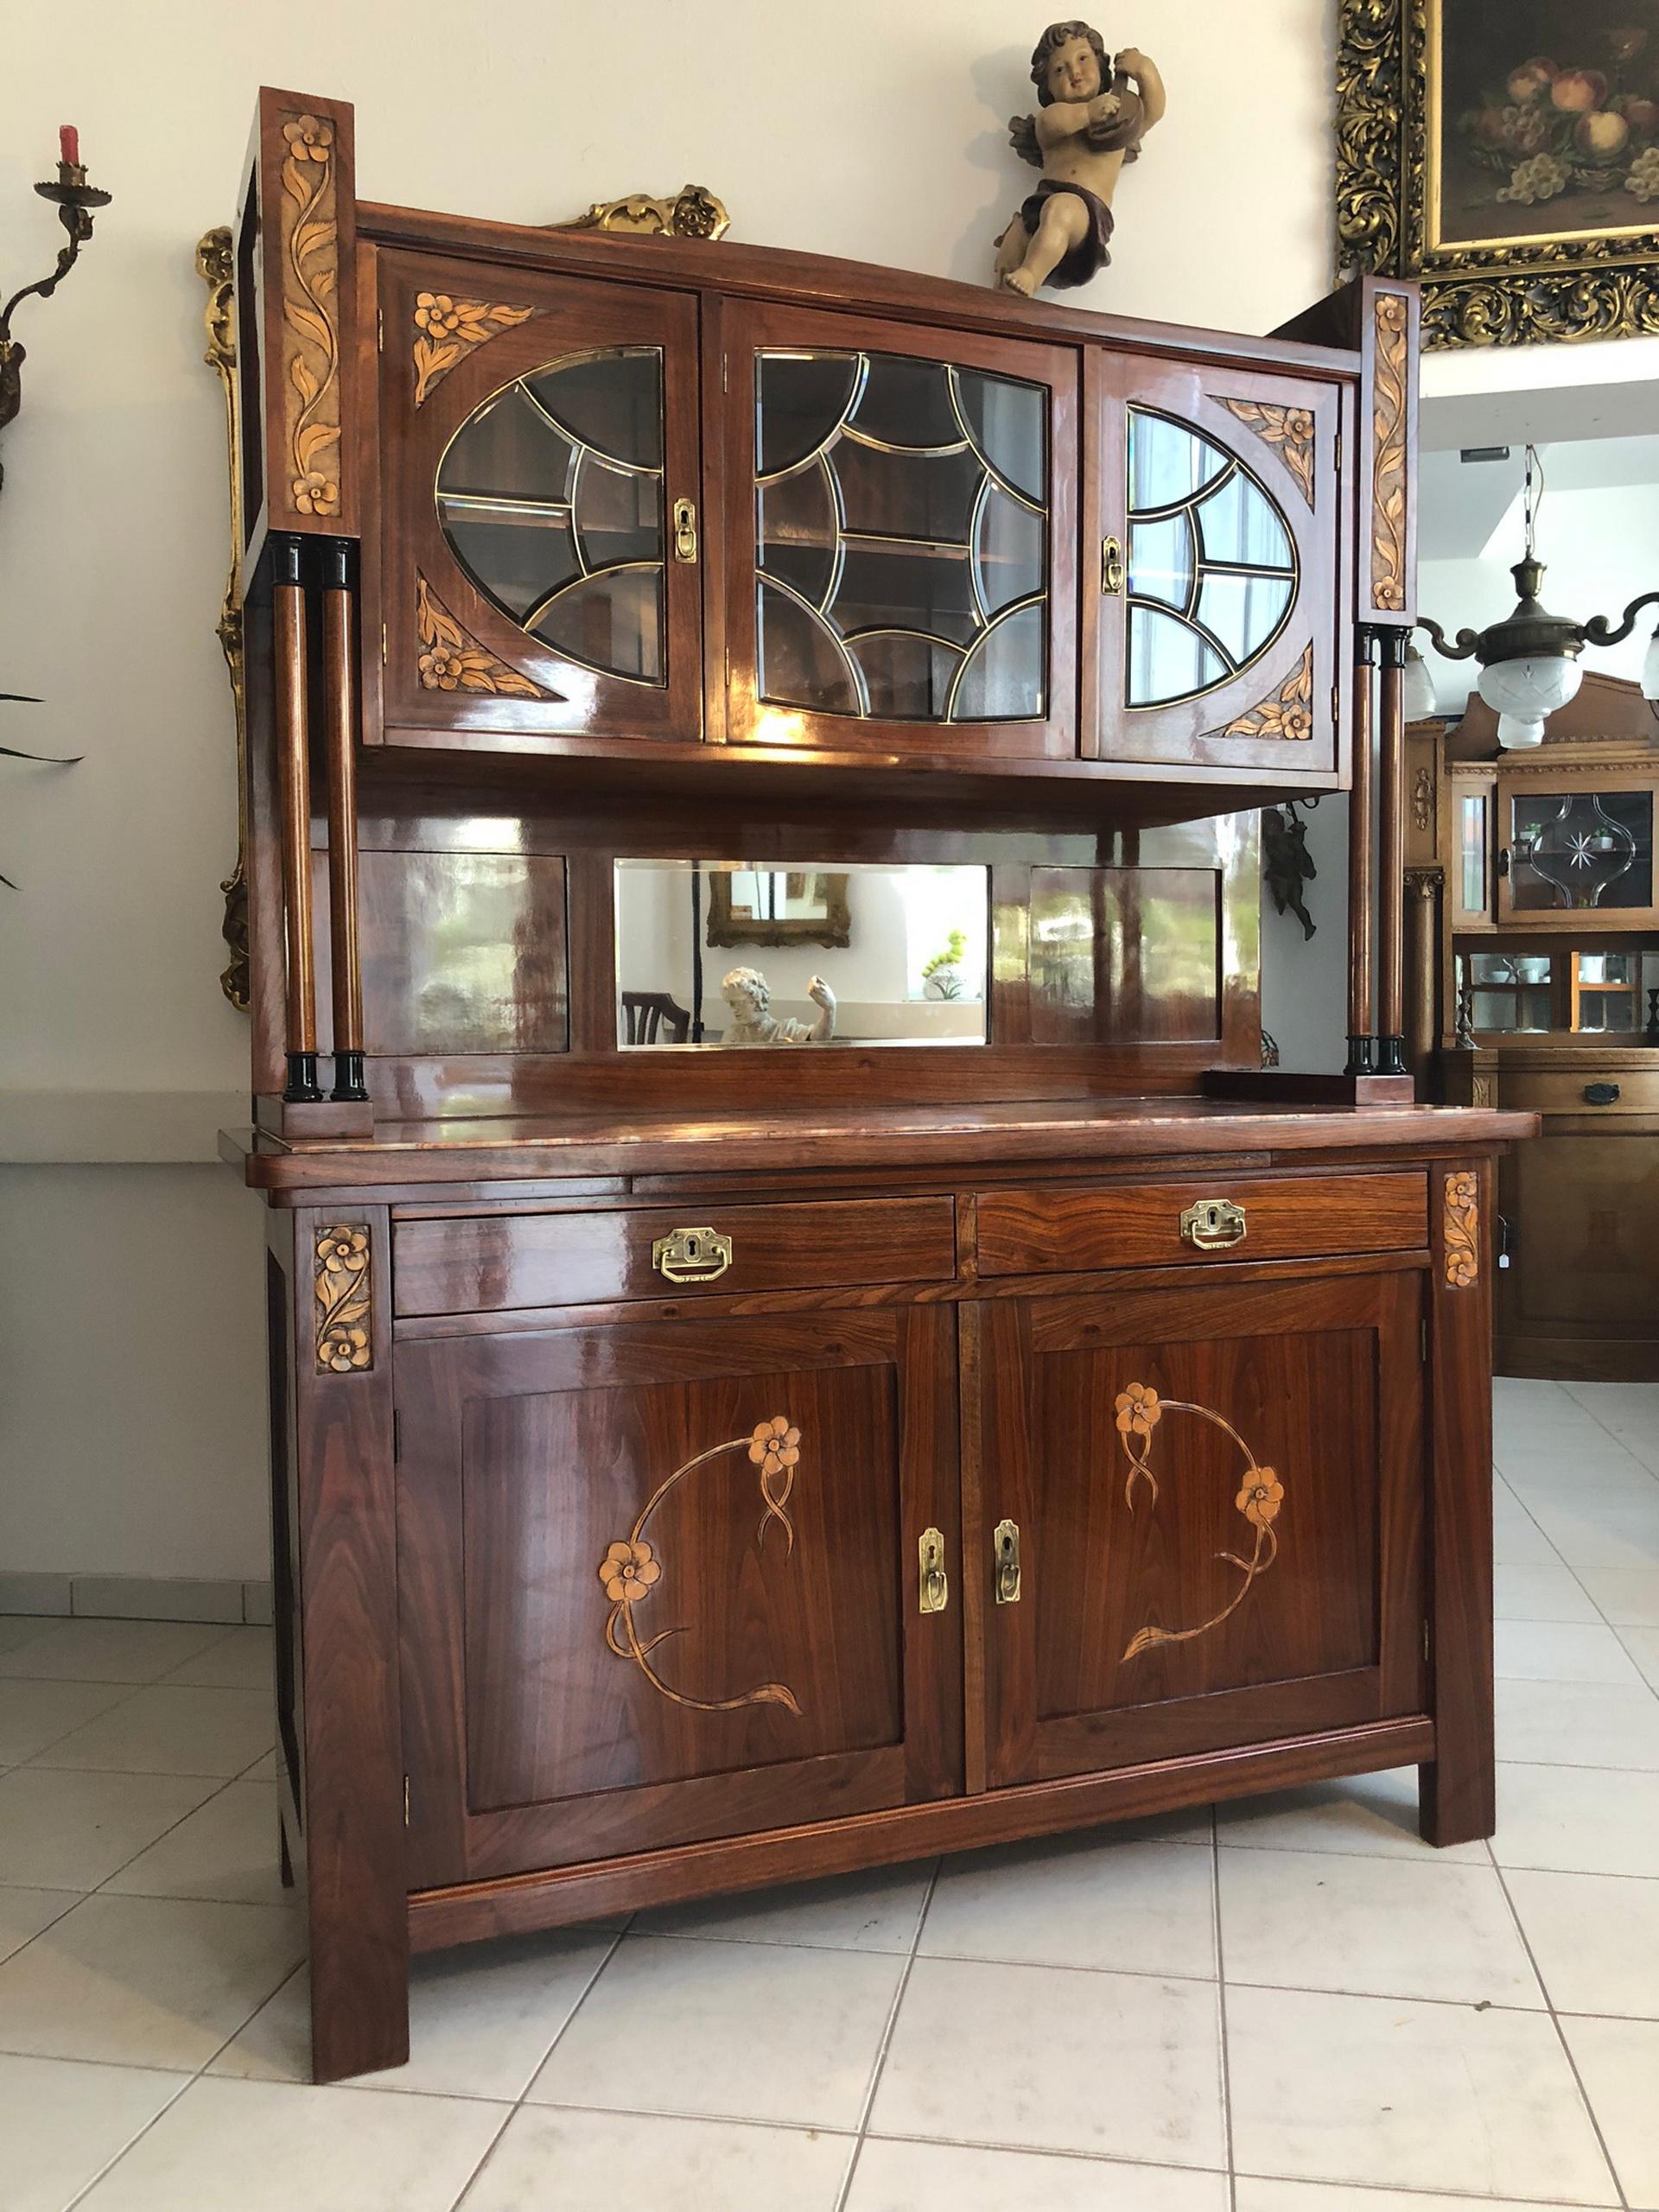 Unique and rare Jugendstil / Art Deco buffet cabinet with wonderful floral ornamentations and marquetry works. The design features double pillars on each side, fruitwood inlays on the doors and the outer frame, a central mirror, as well as a granite